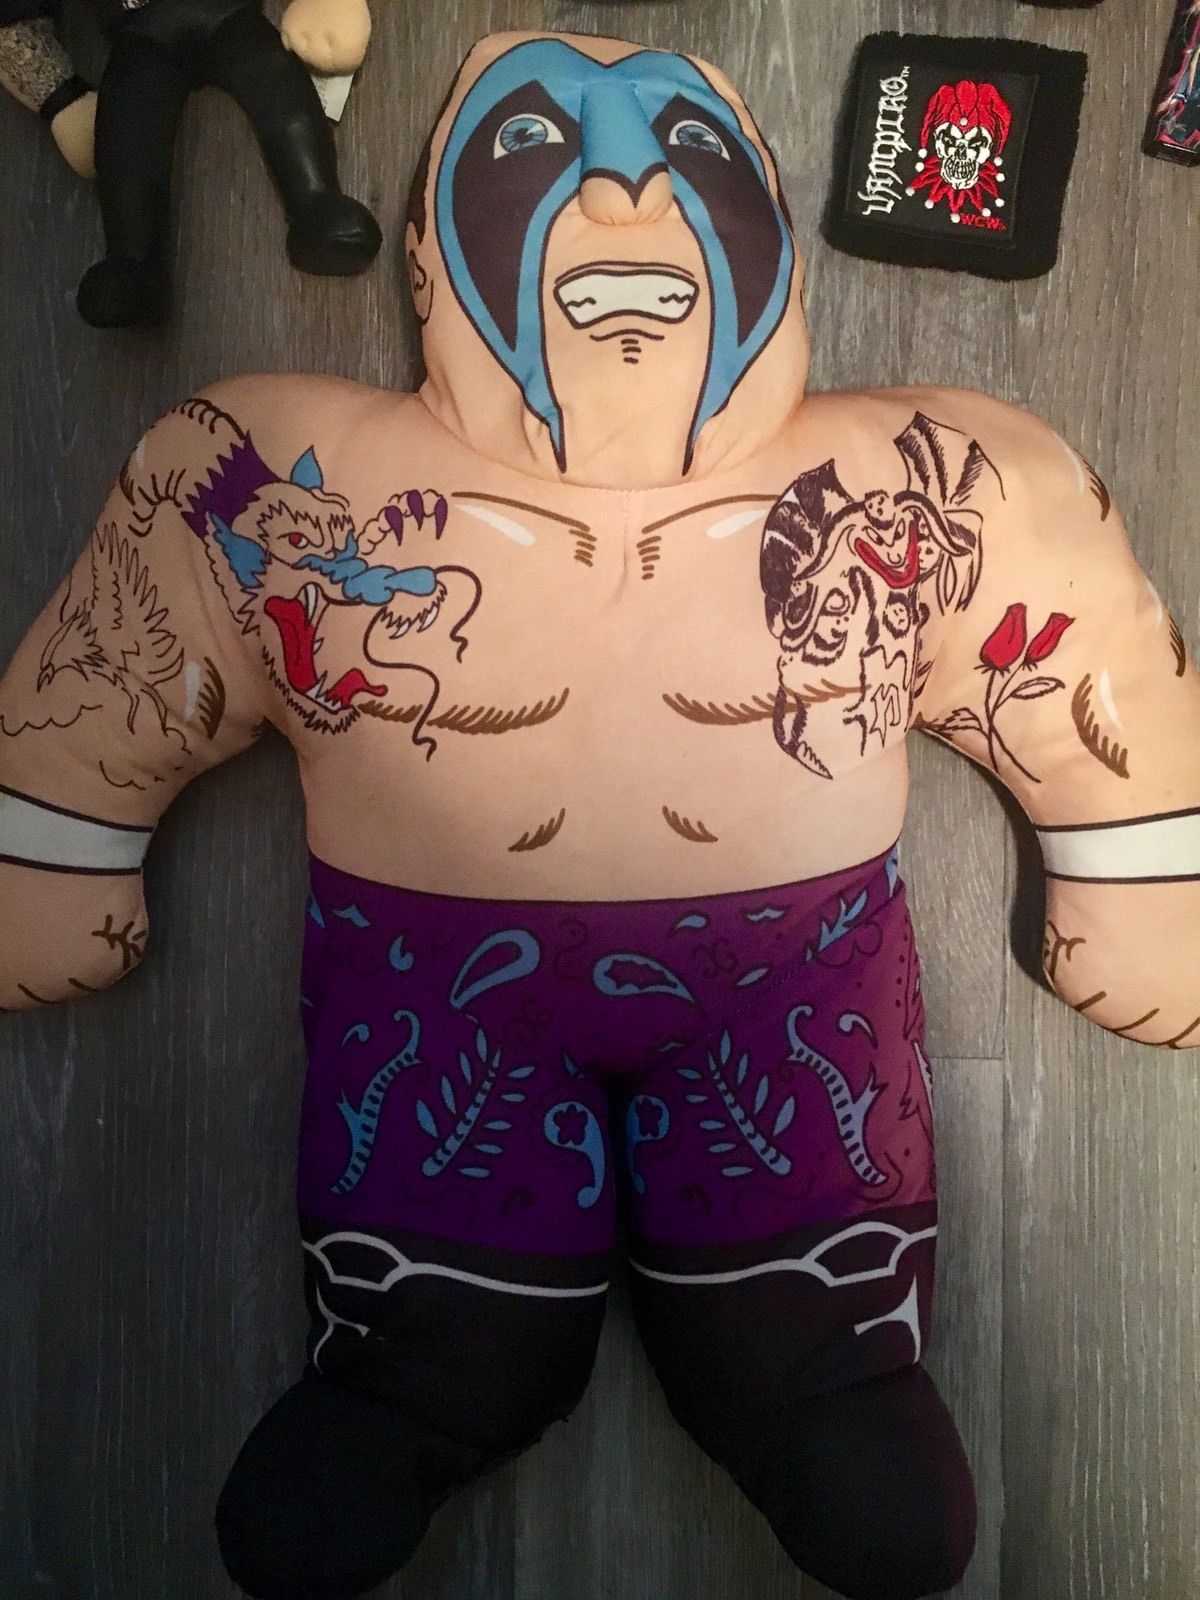 WCW eBay Find of the Day: Vampiro Mask, Doll, Wrestling Buddy and More ...